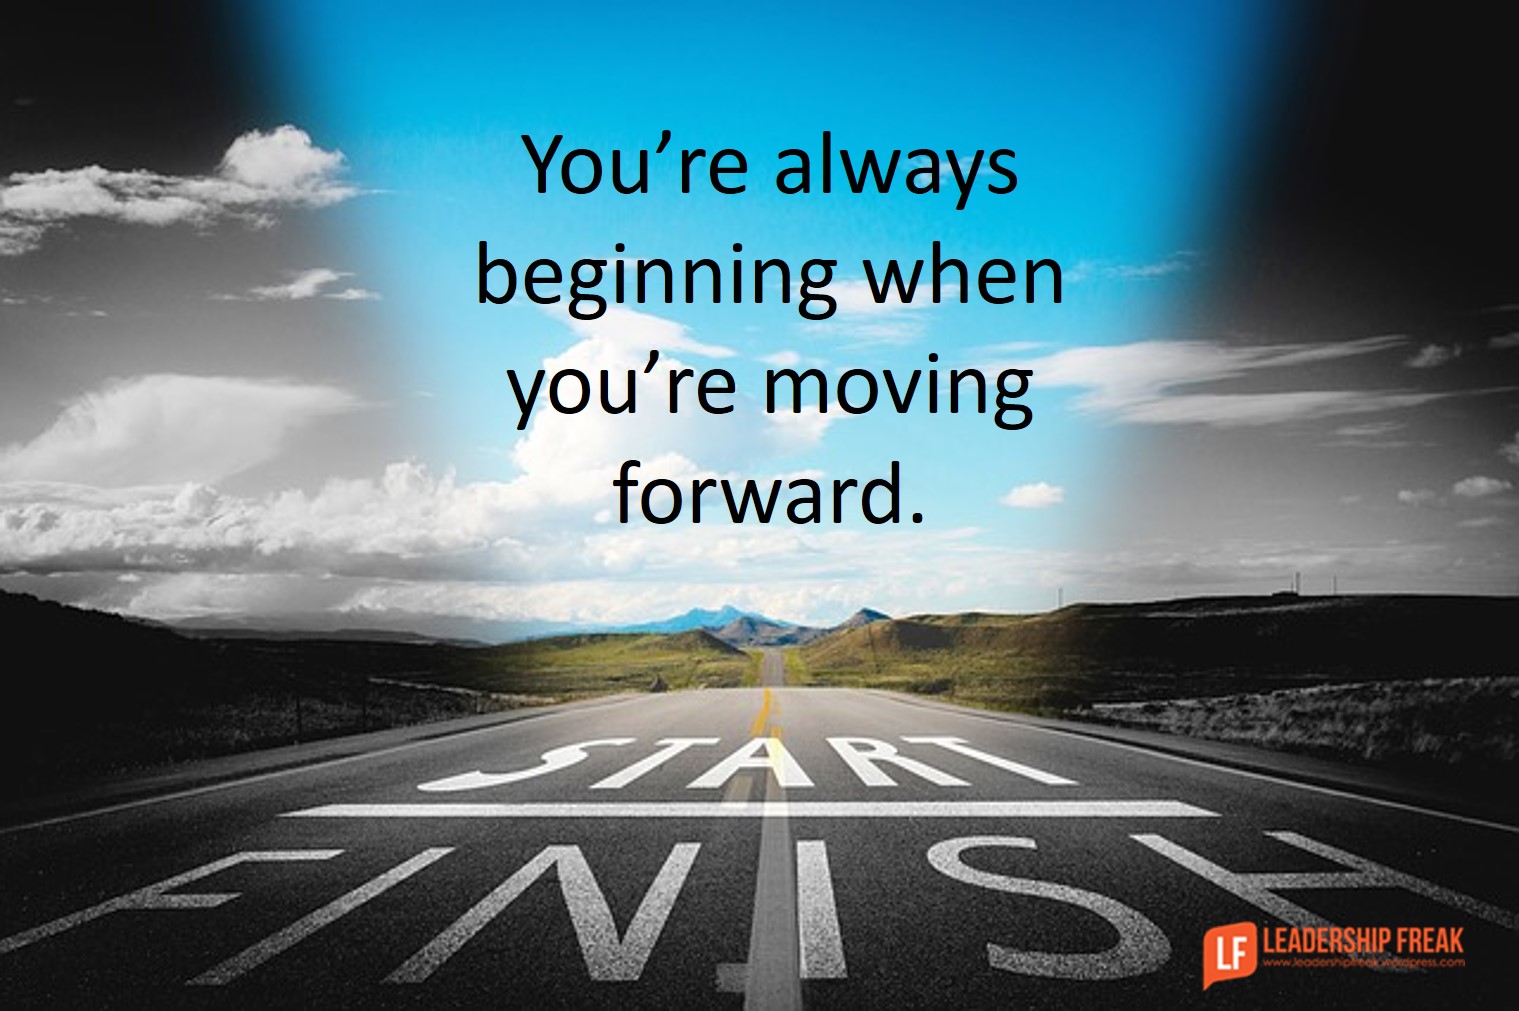 You're always beginning when you are moving forward.